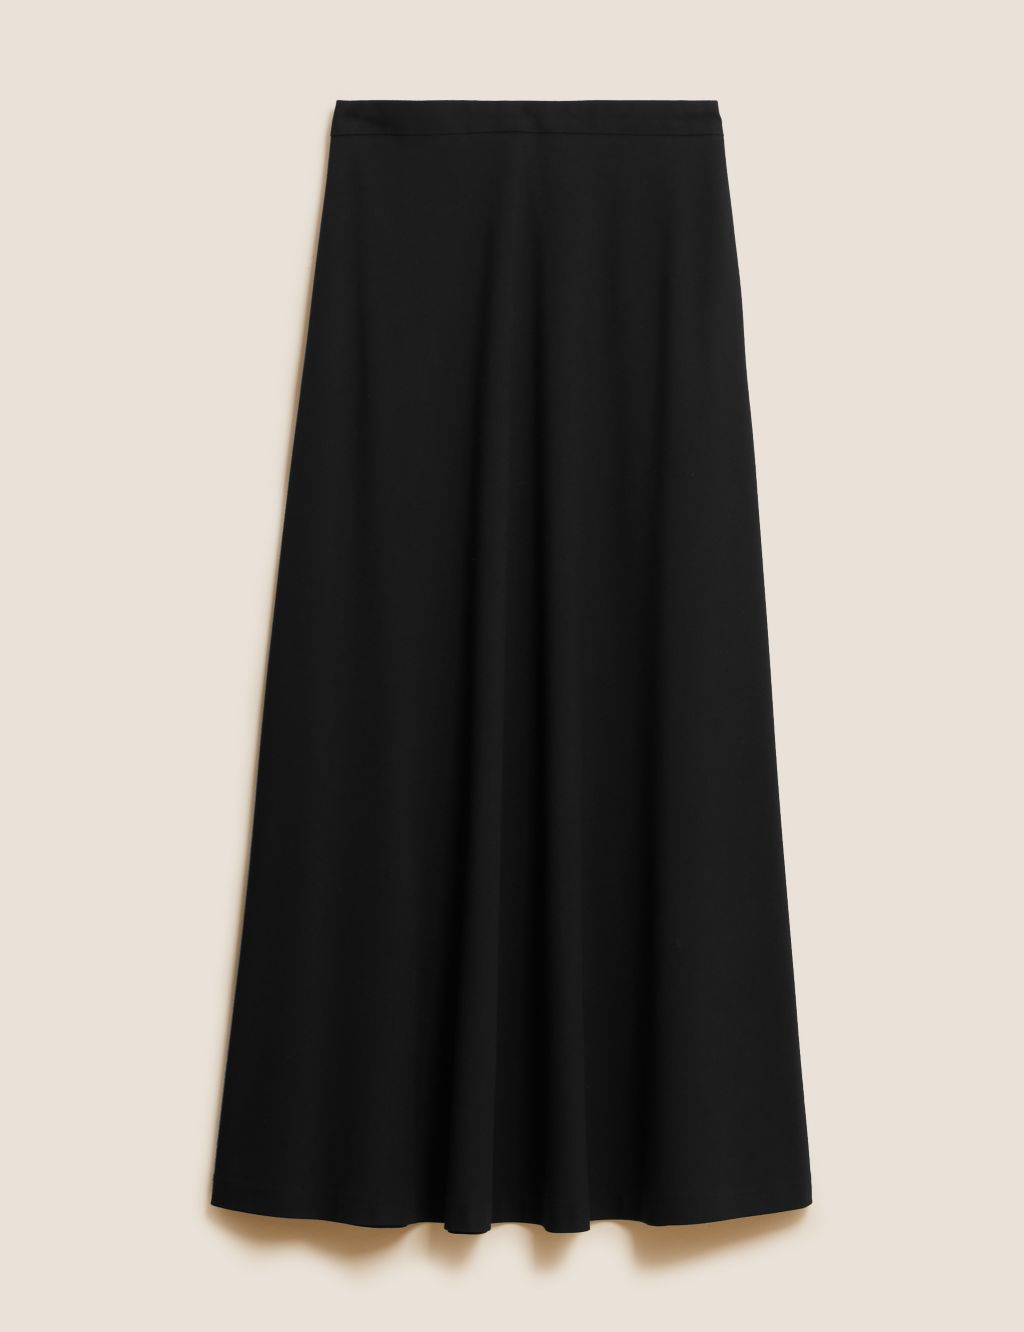 Maxi A-Line Skirt | M&S Collection | M&S